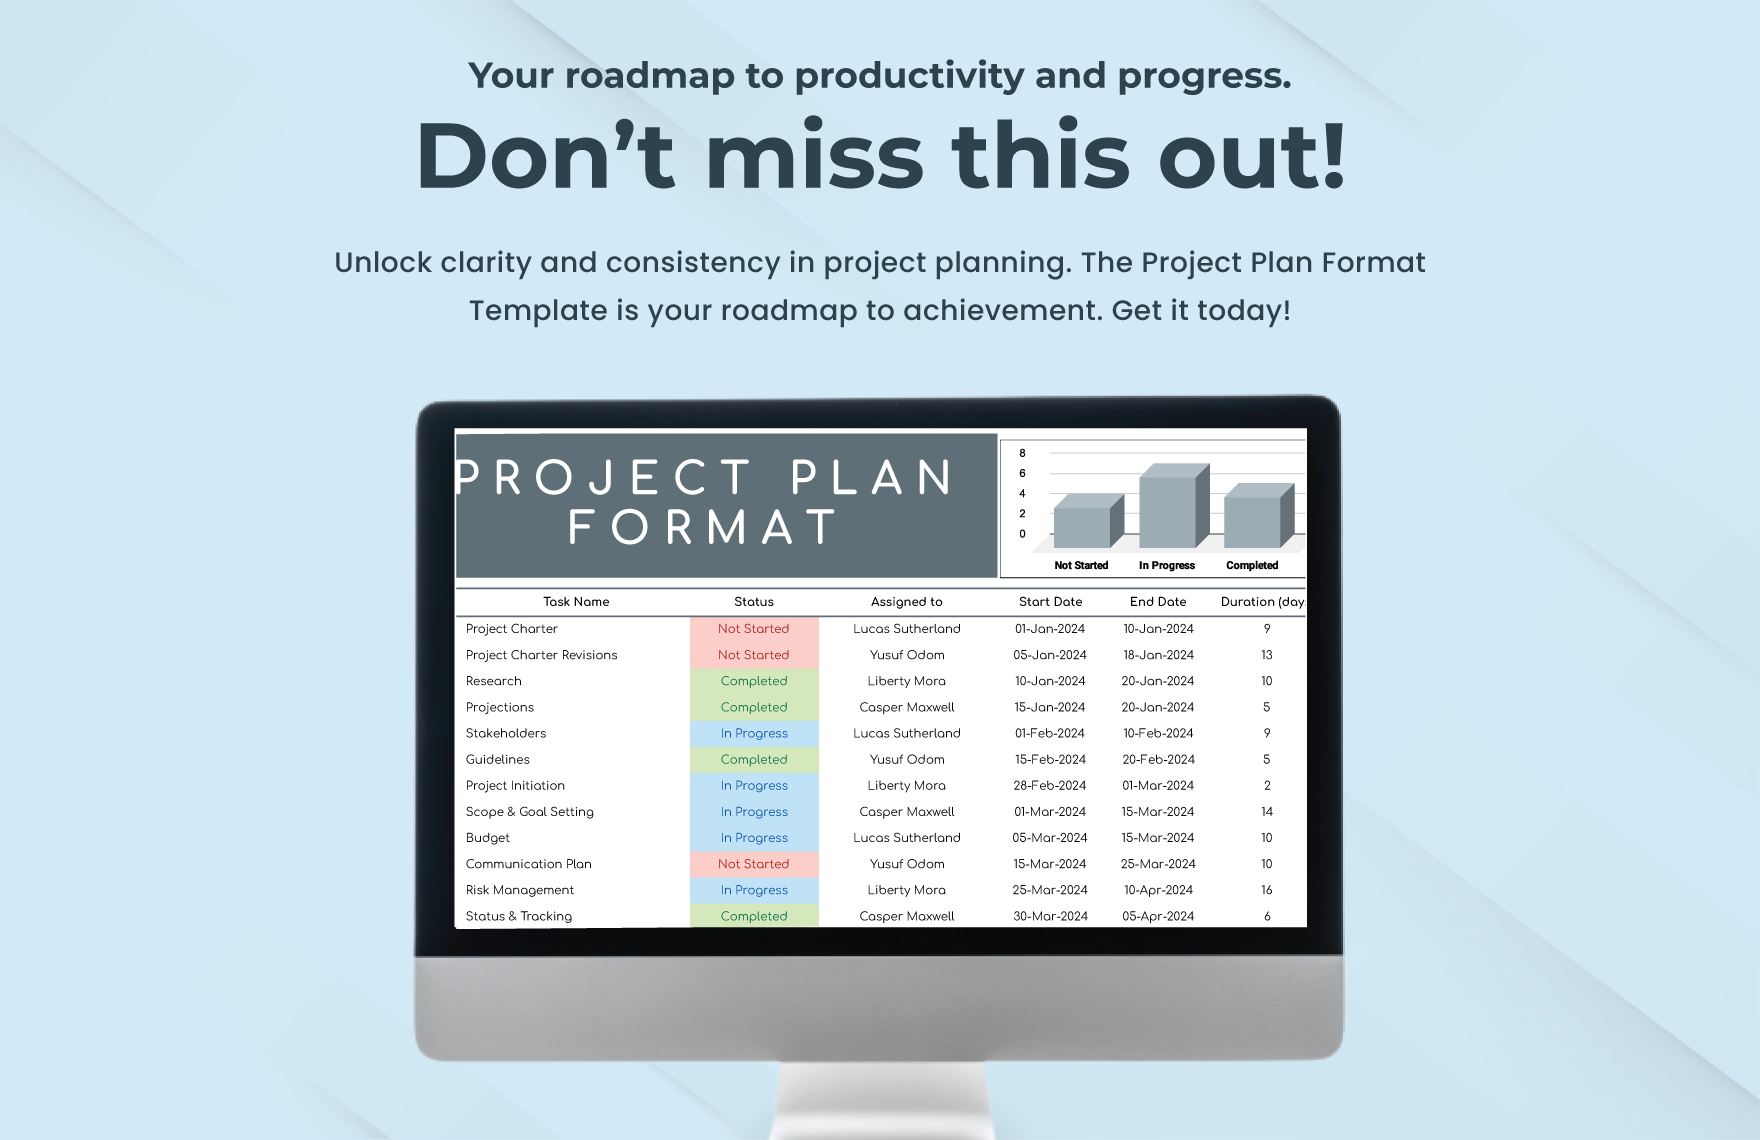 Project Plan Format Template